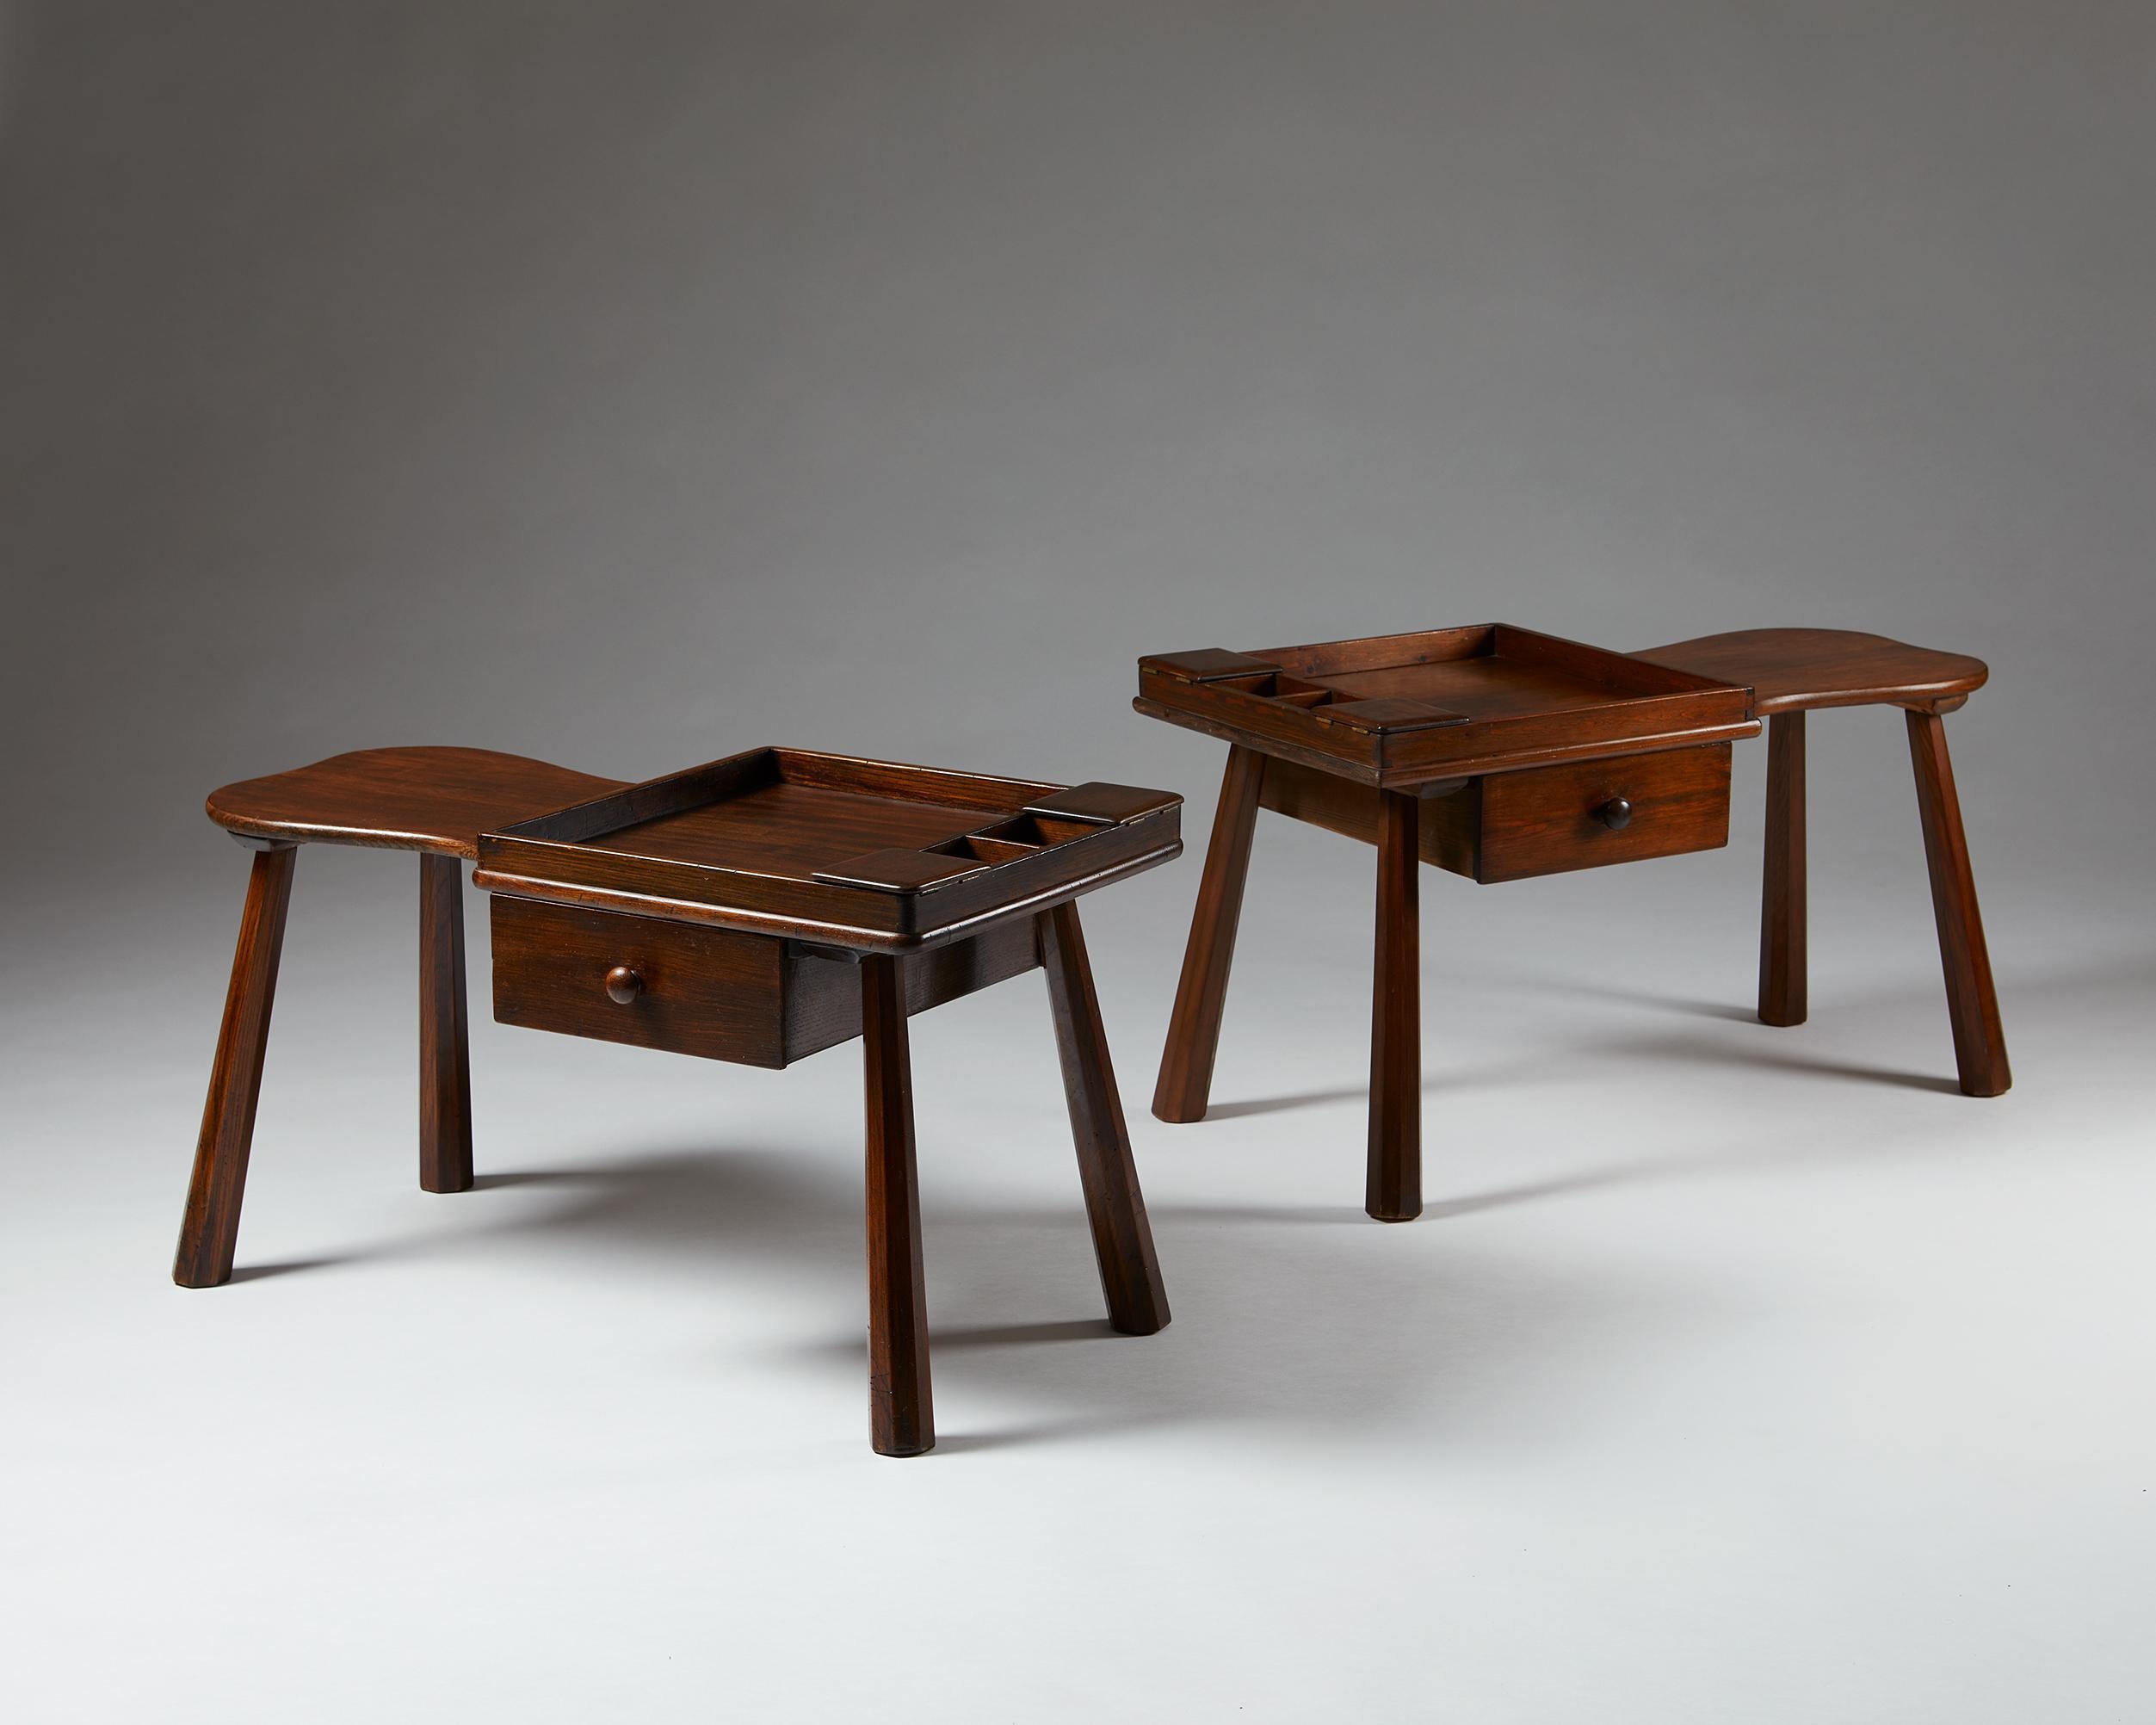 Mid-20th Century Pair of Side Tables Designed by Ericson Taserud, Sweden, 1963